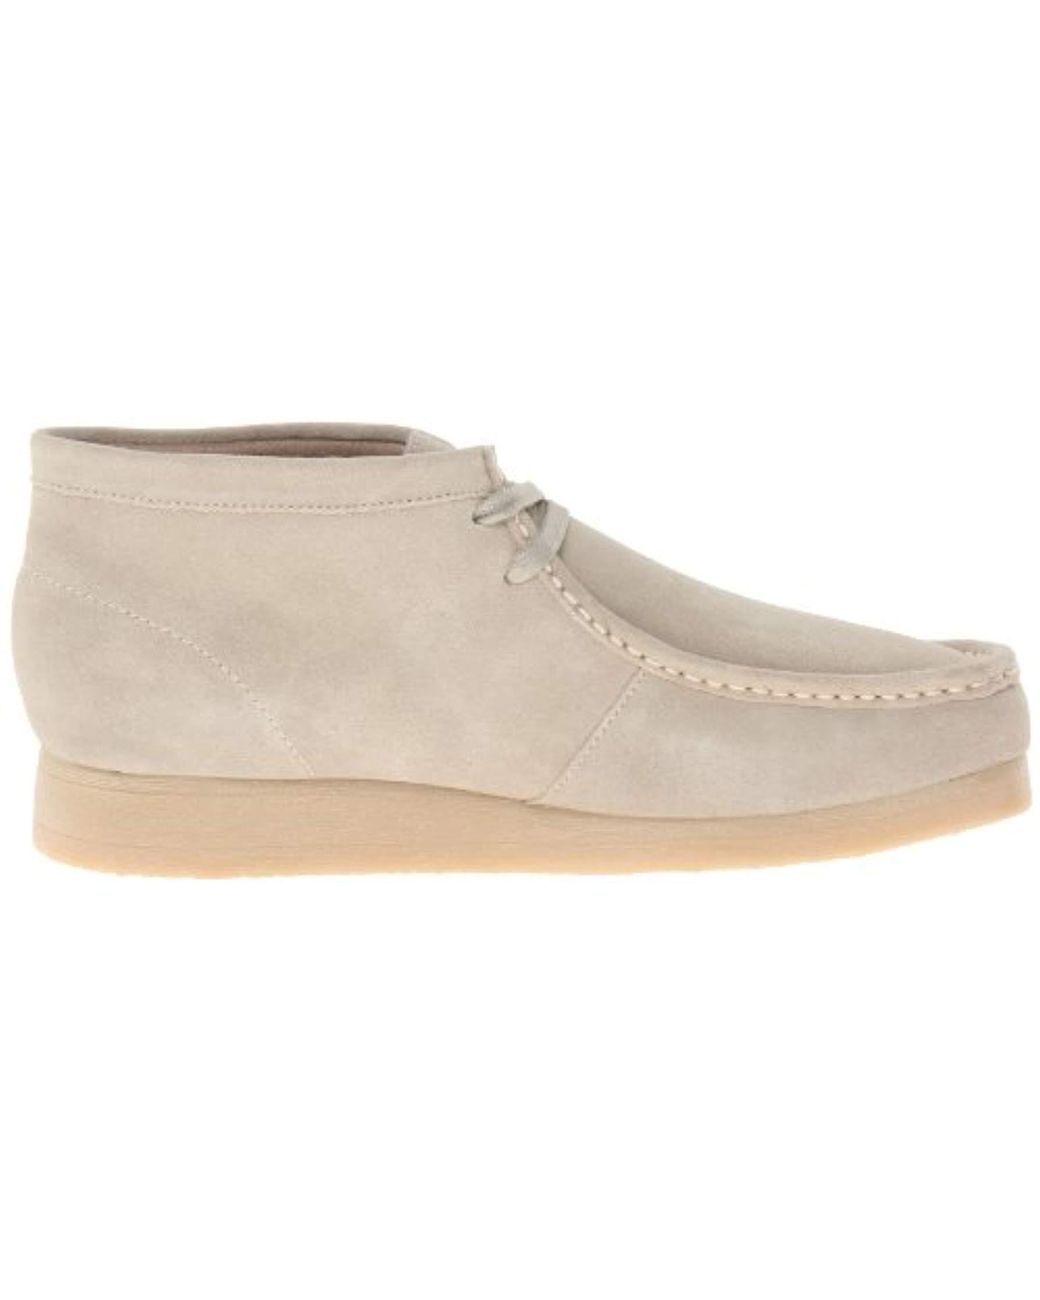 Clarks Stinson Hi Chukka Boot,sand Suede,8 M Us in Natural for Men | Lyst